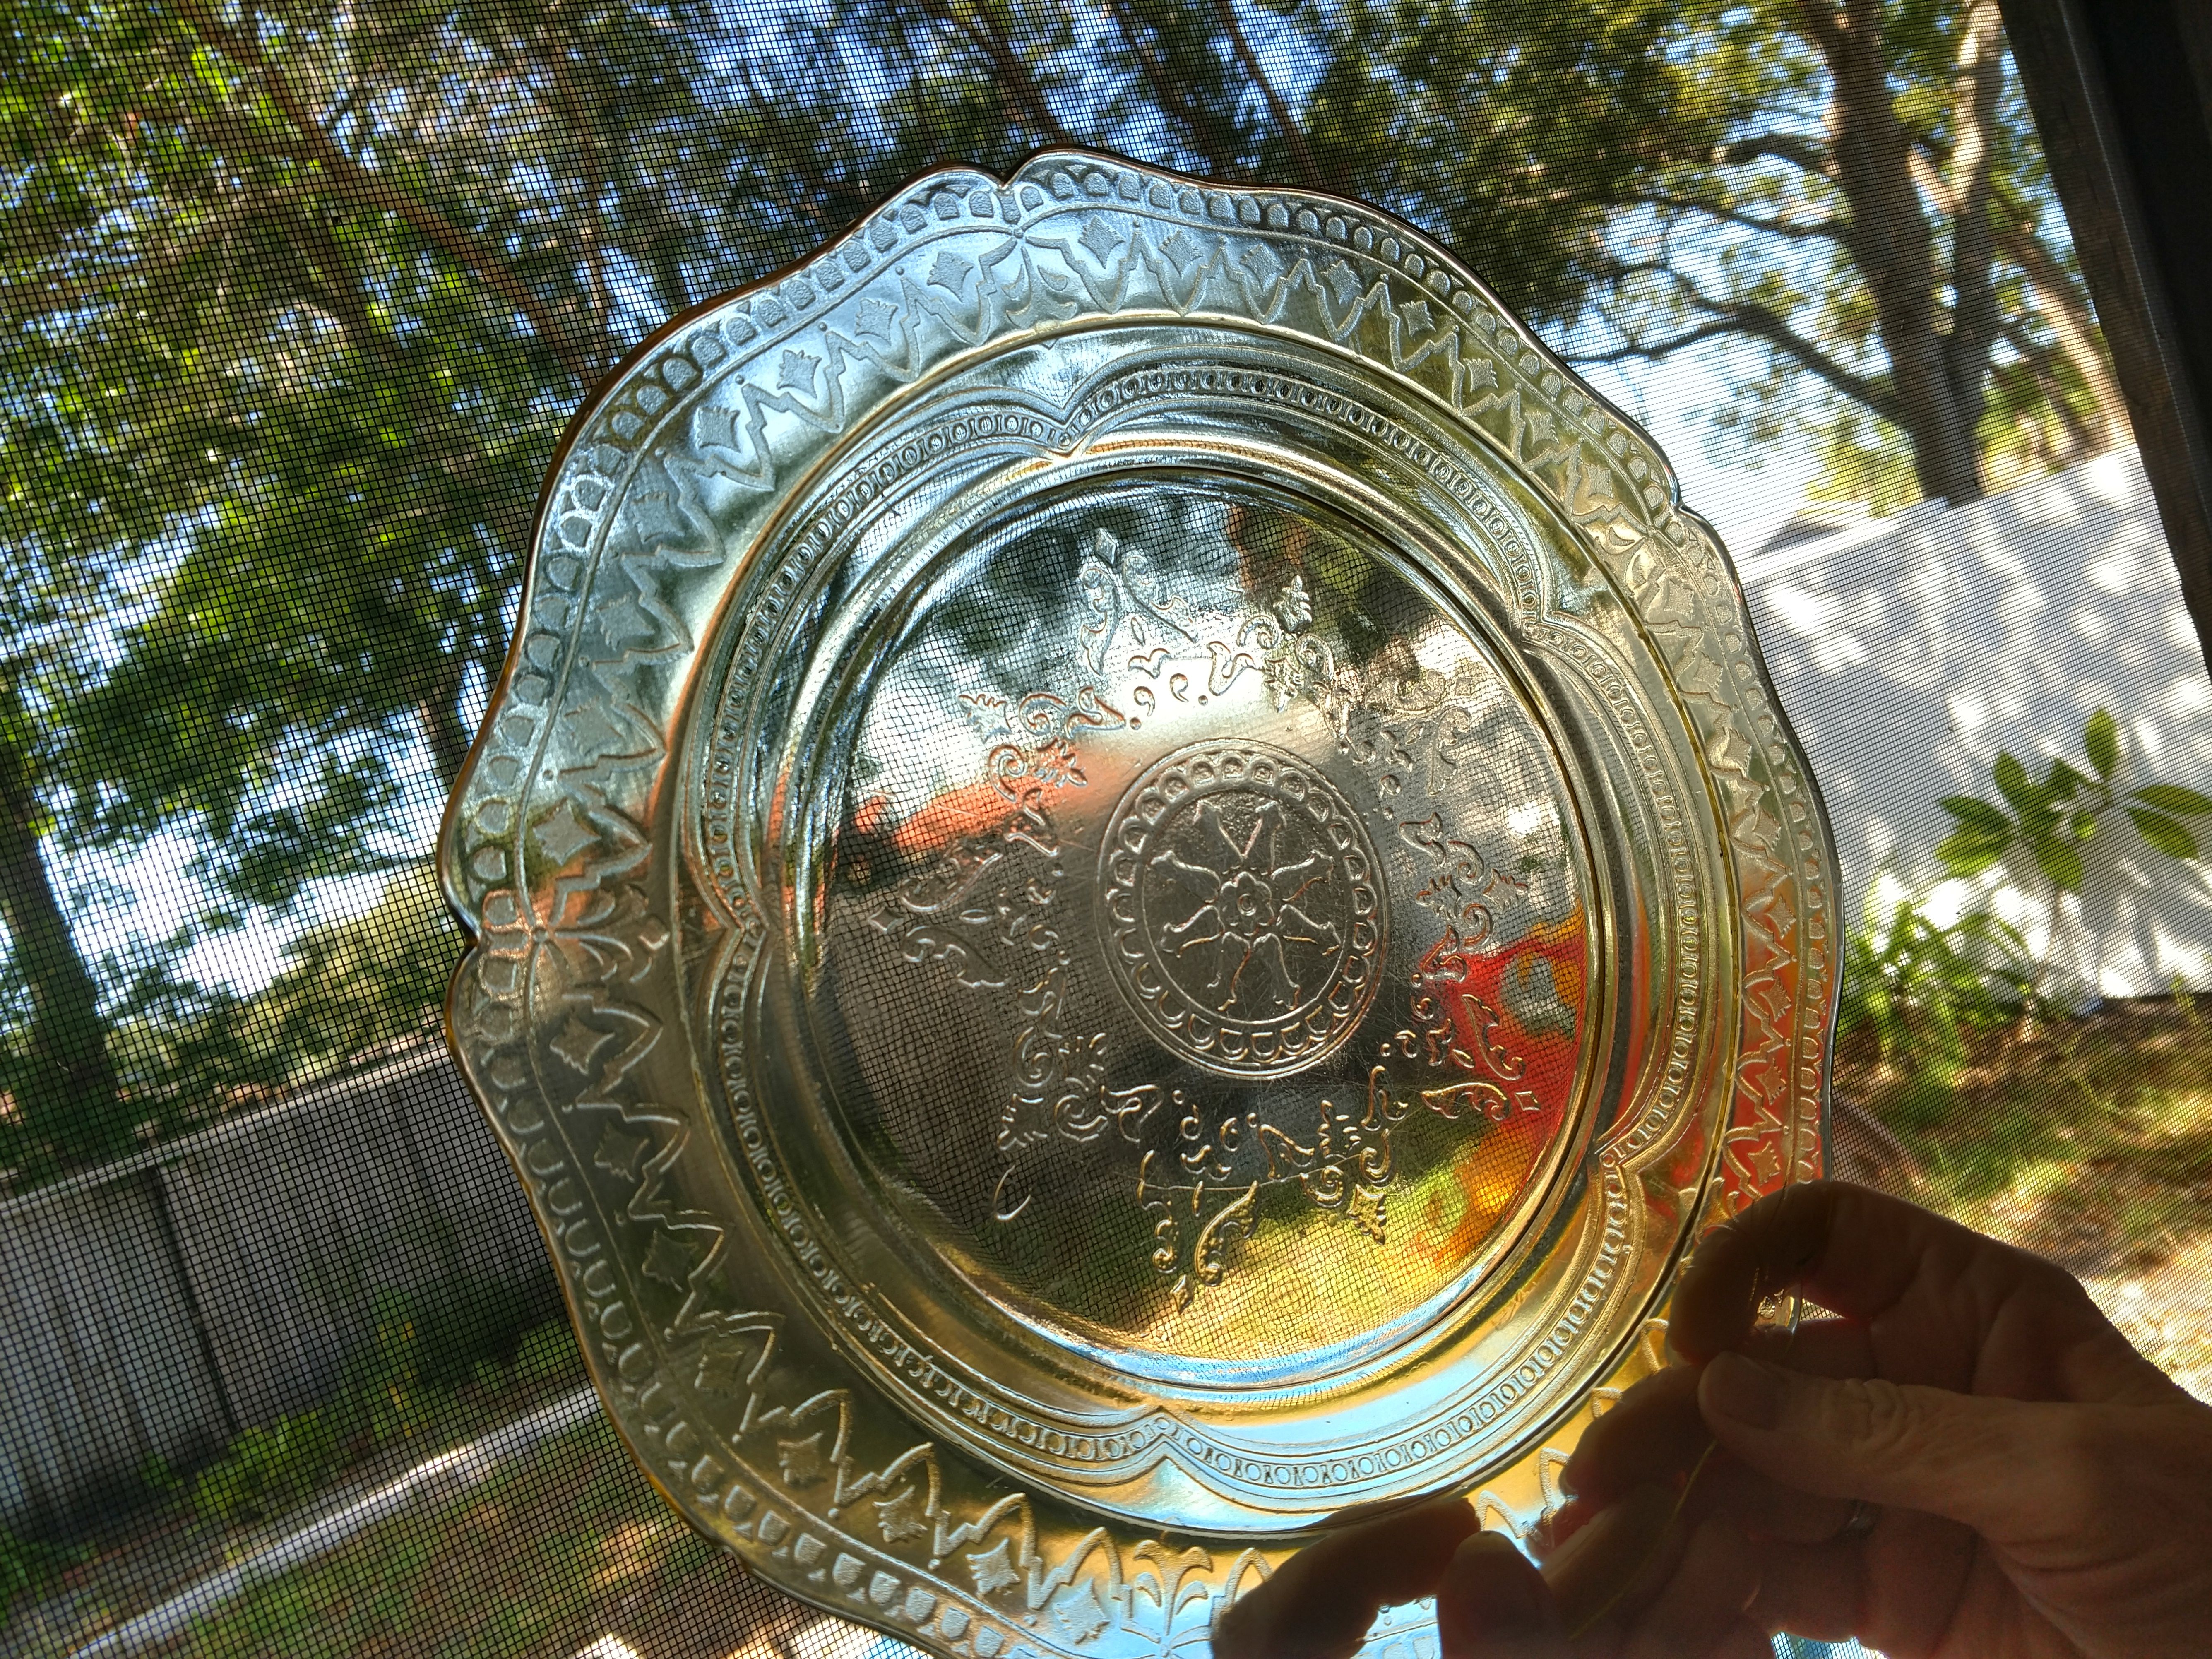 Patrician Amber Depression Glass dinner plates(half price for the items below)